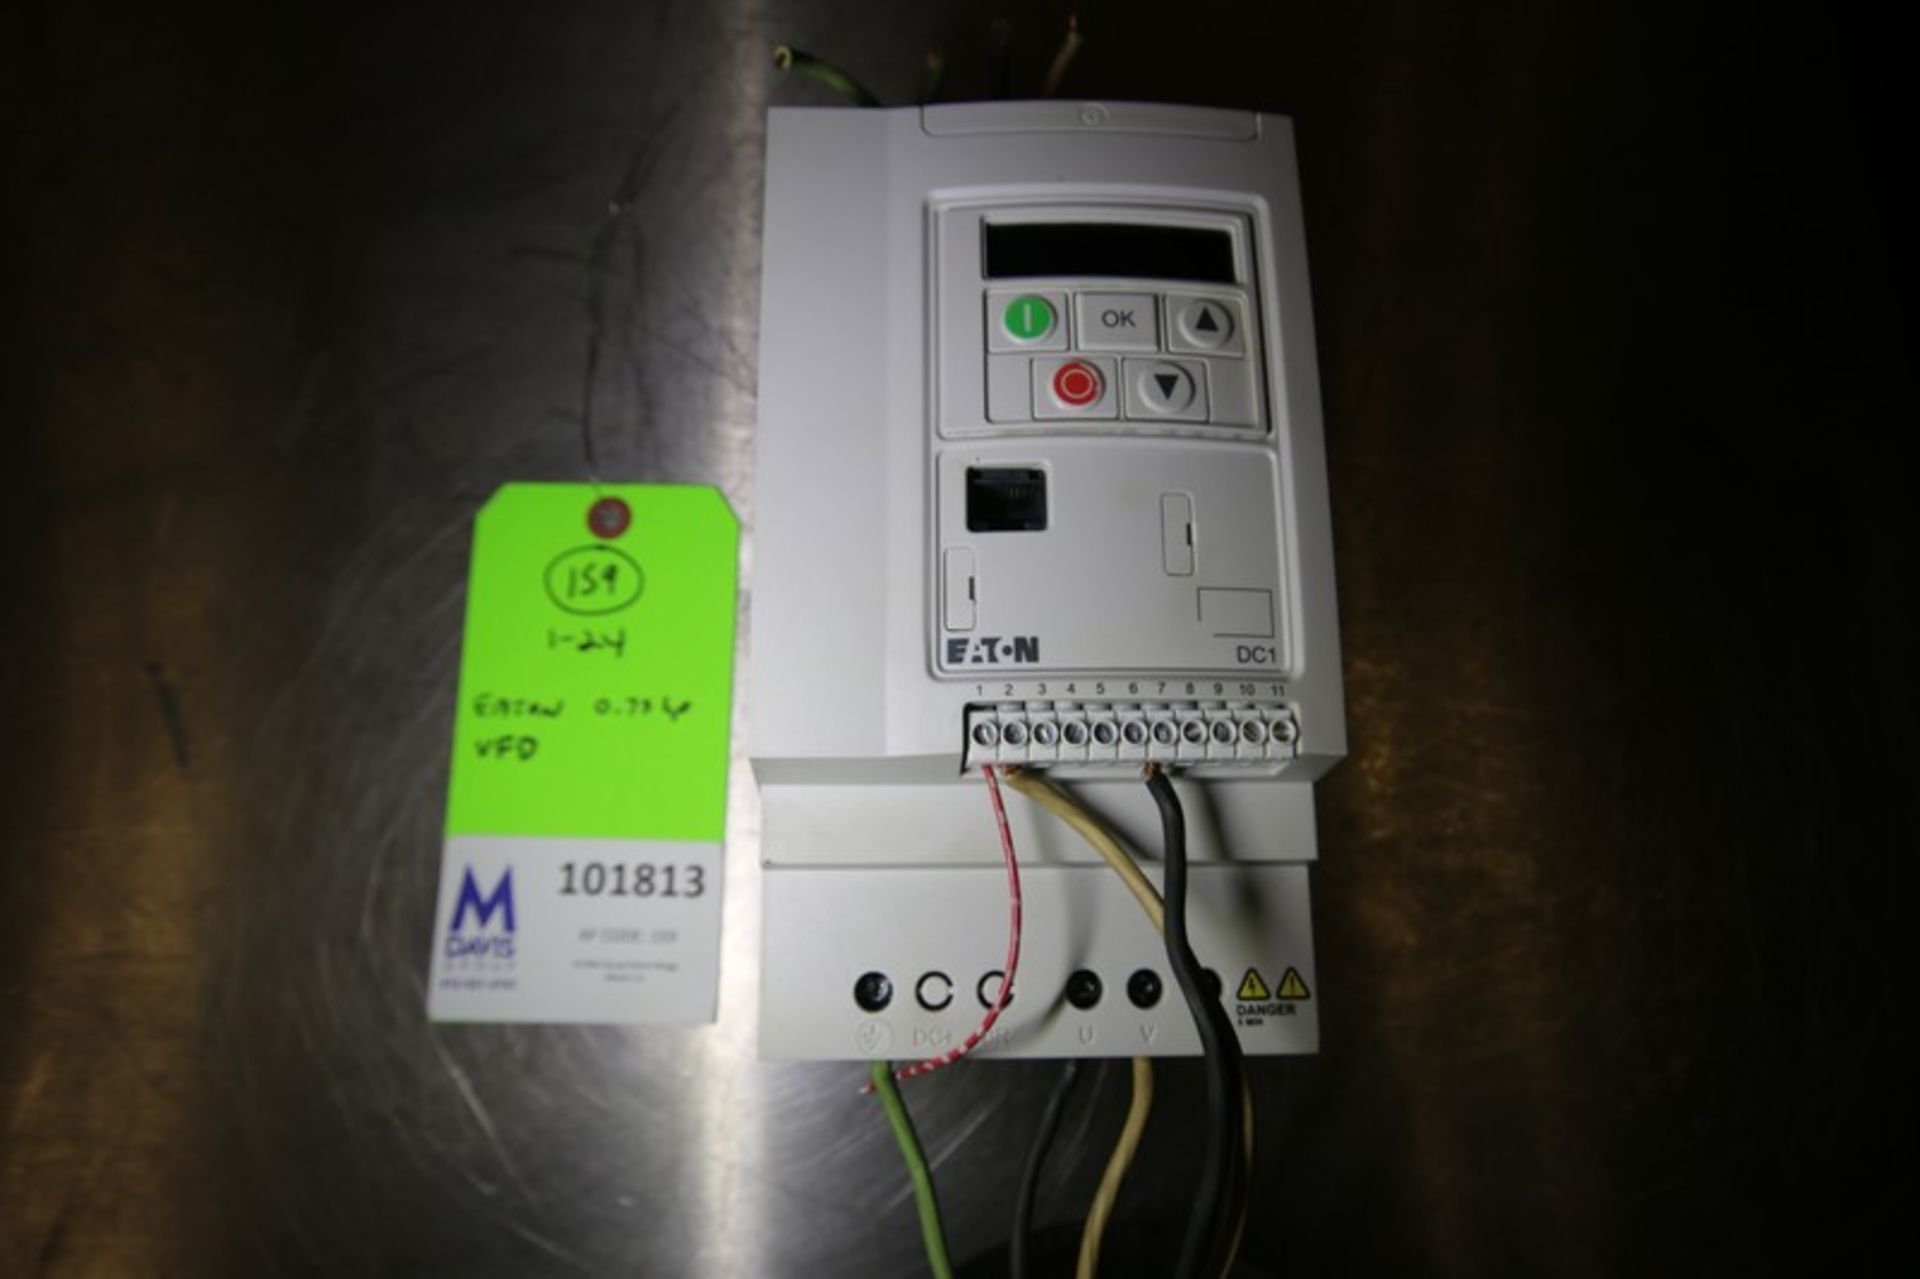 Eaton 0.75 hp VFD, Series DC1 Power XL, Model DC1-S1011NB-A20N, 110V (INV#101813) (Located @ the MDG - Image 2 of 3